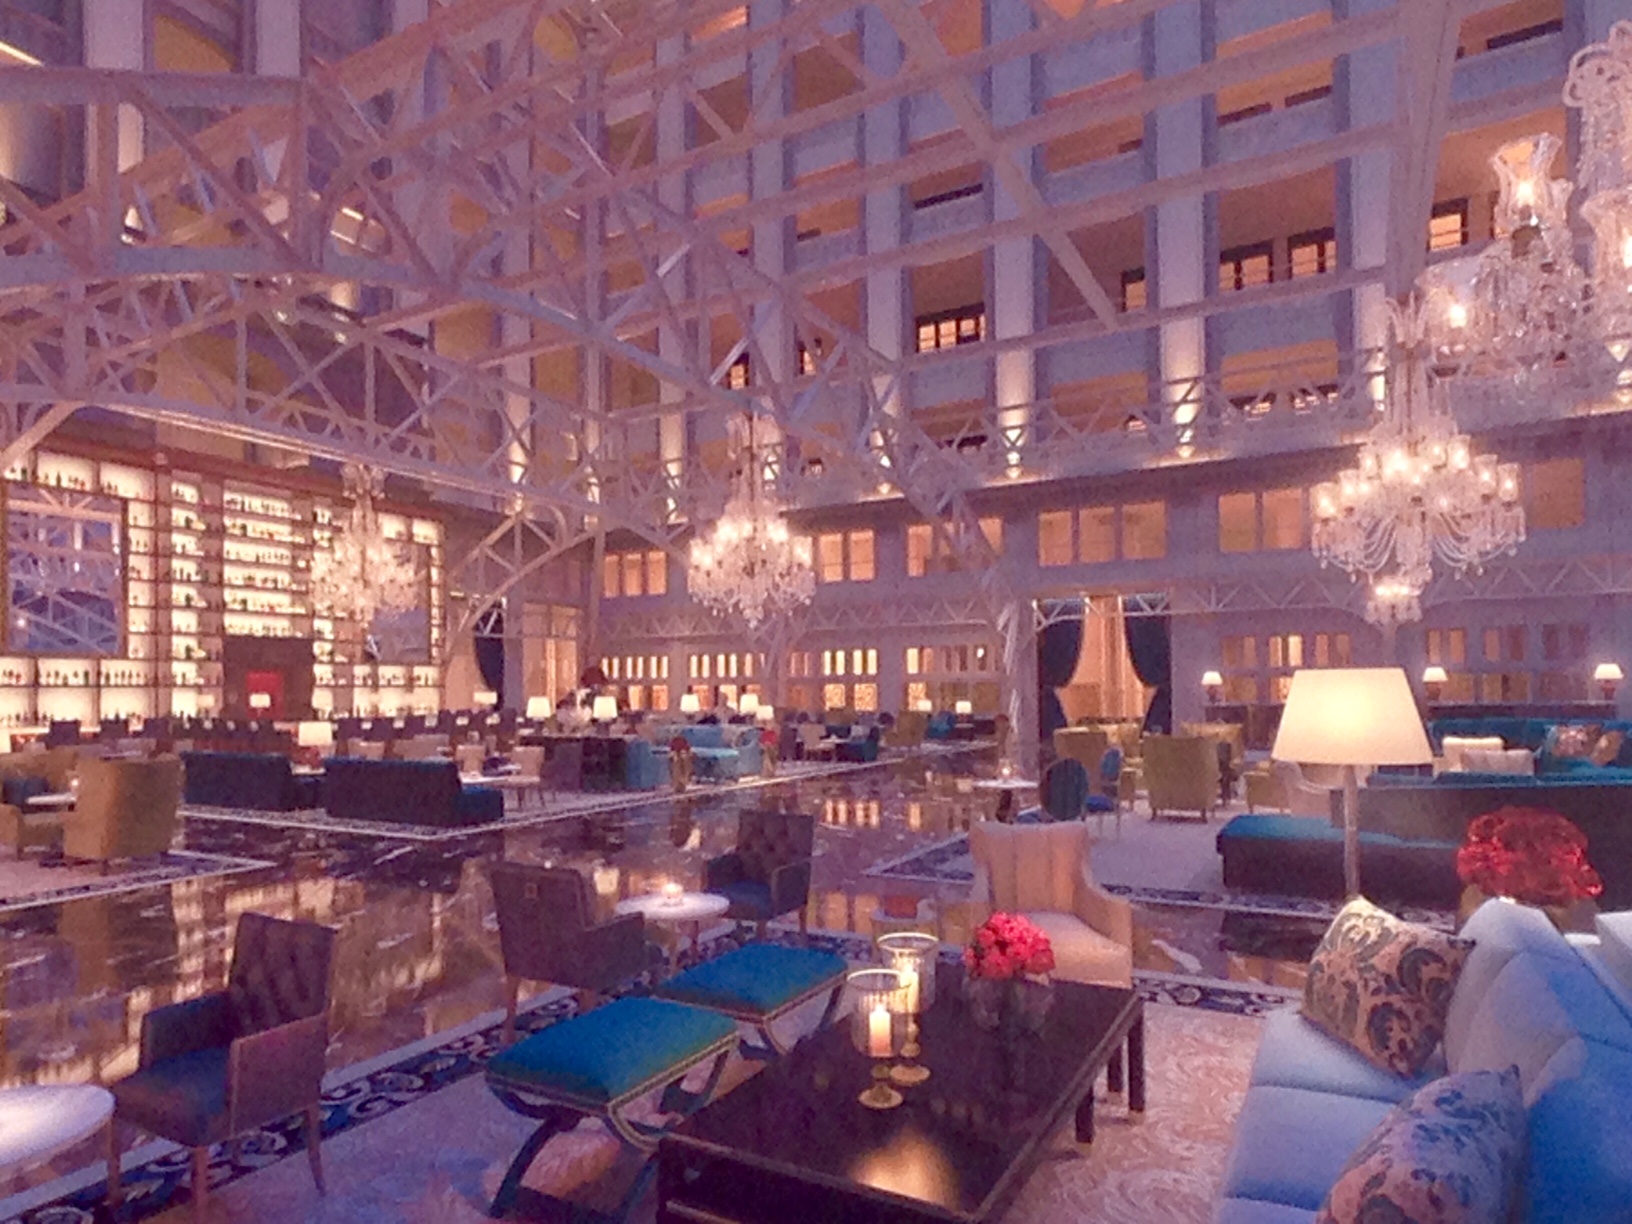 An artist's rendering of the atrium, where Donald Trump says many architectural features are "landmarked" and could not be changed. (WTOP/Megan Cloherty)